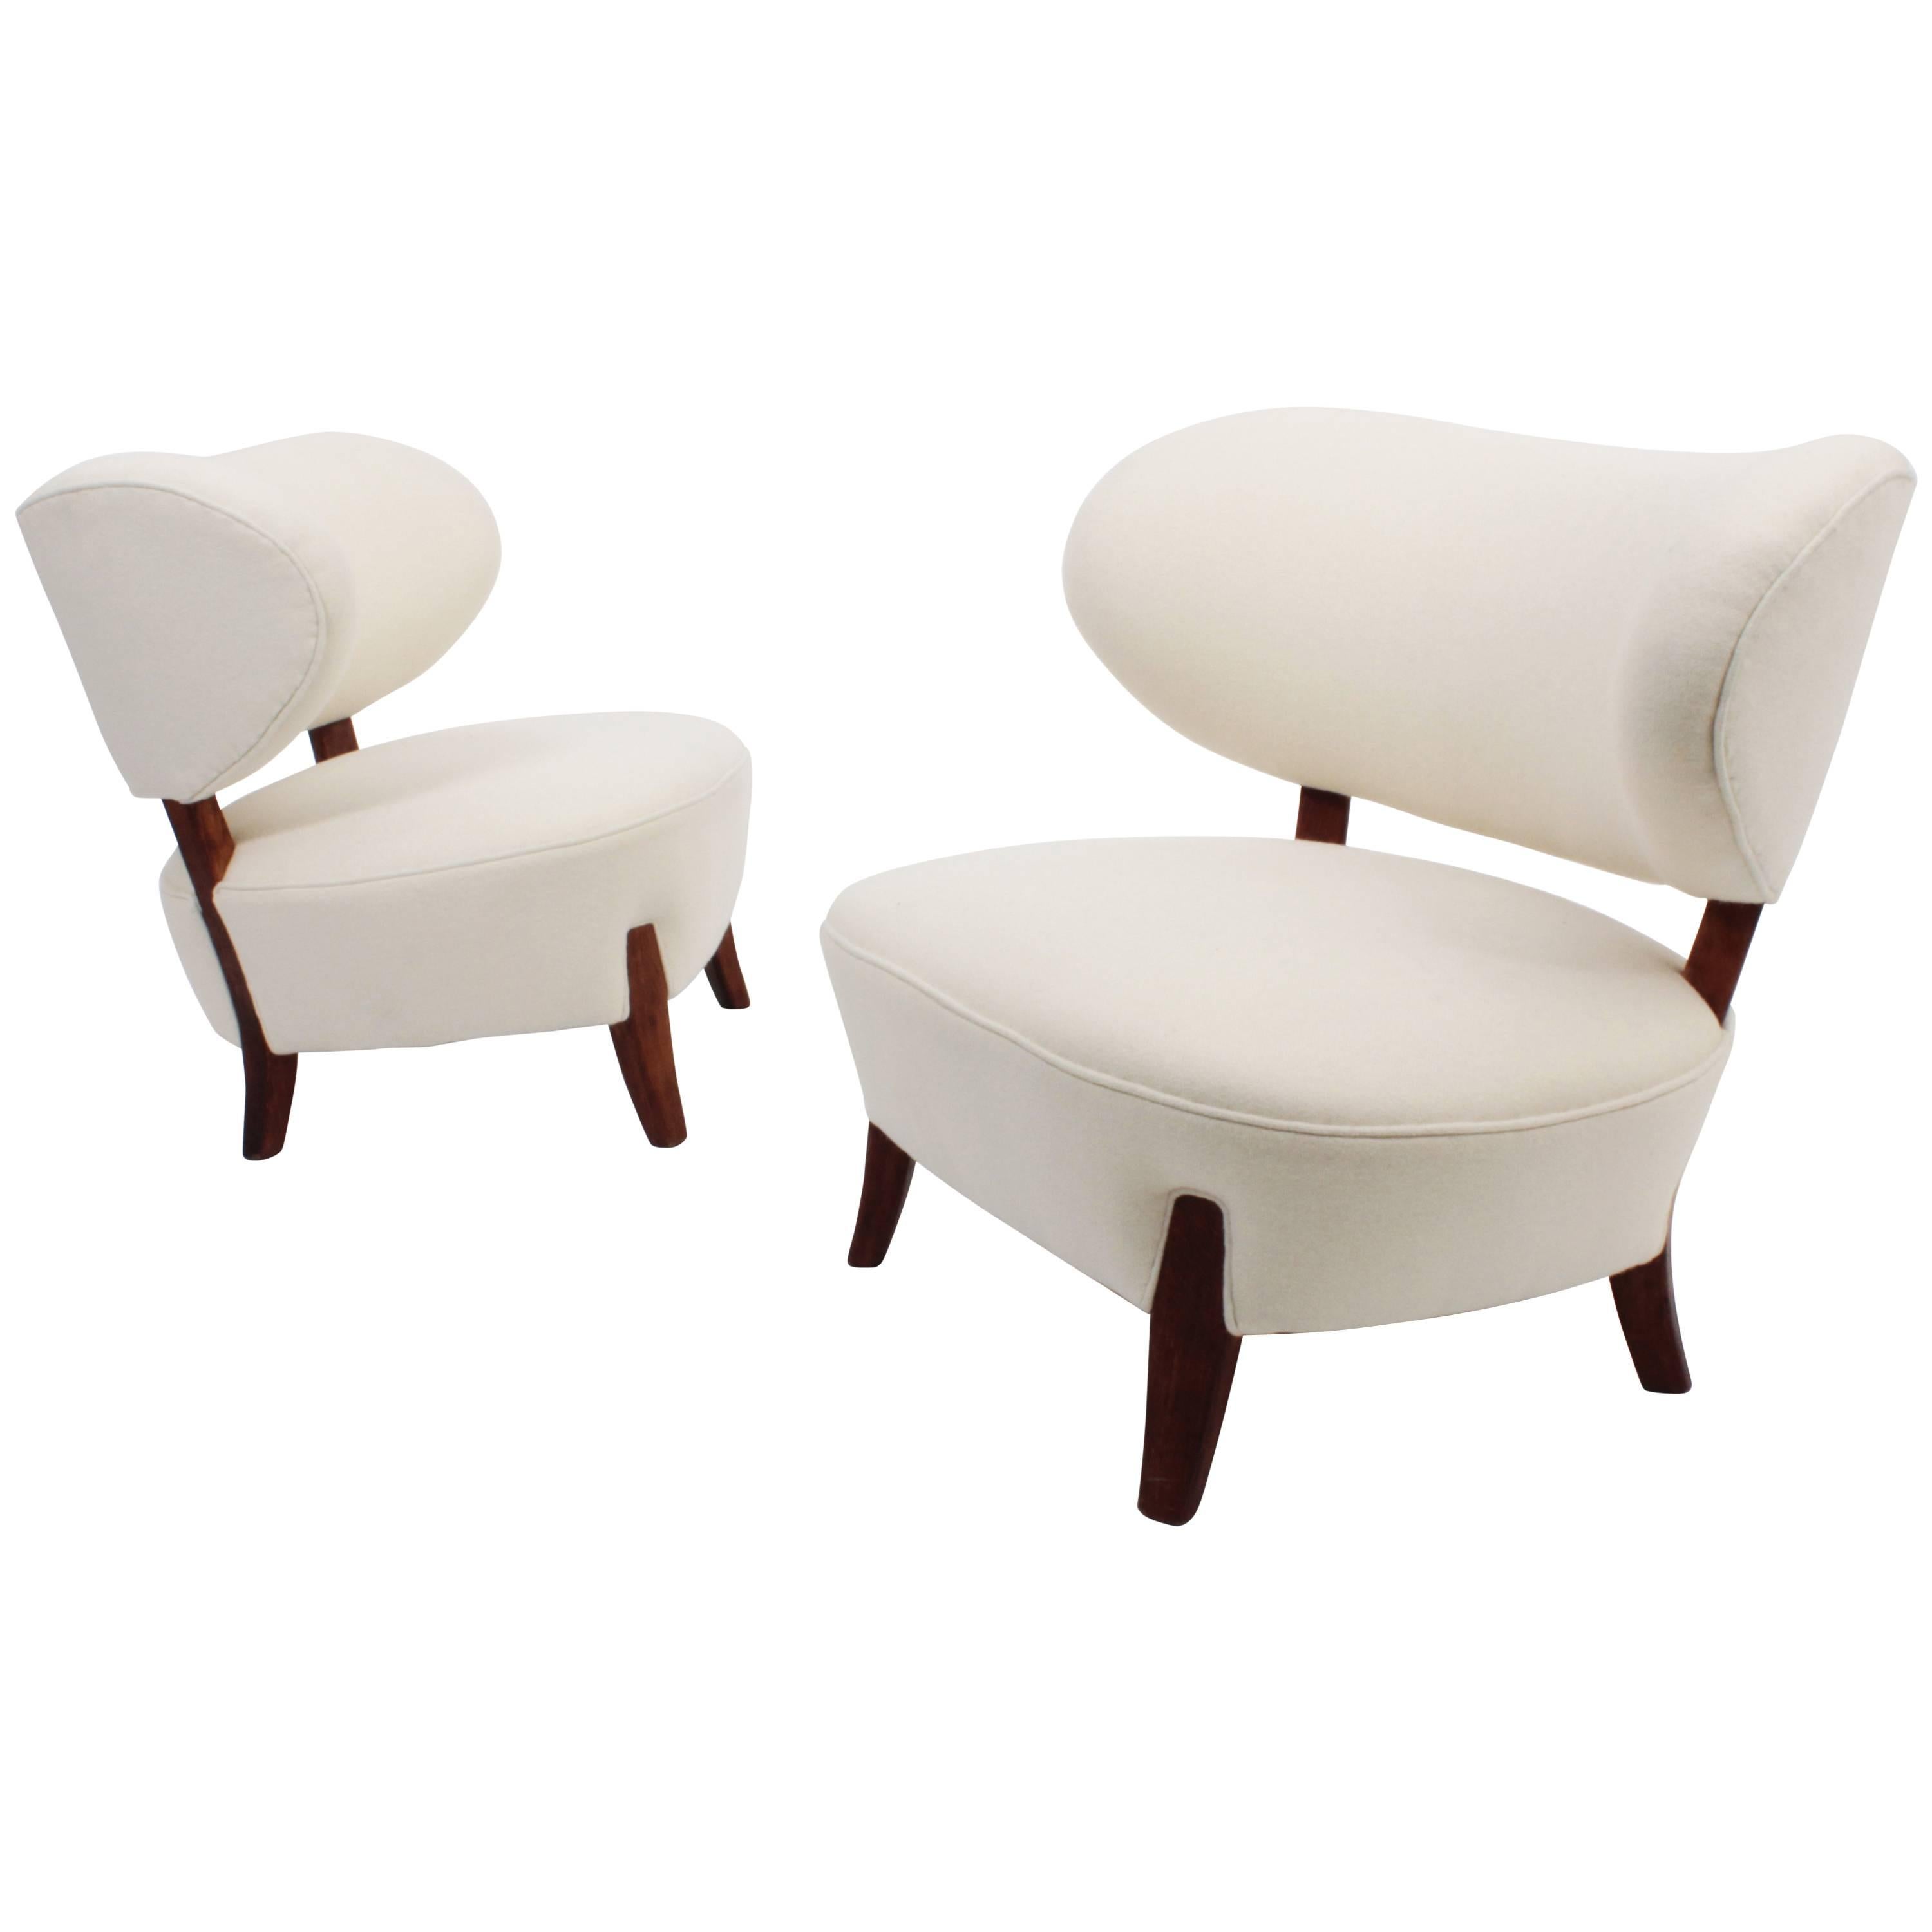 Pair of Otto Schulz Easy Chairs for Boet, Sweden, circa 1940